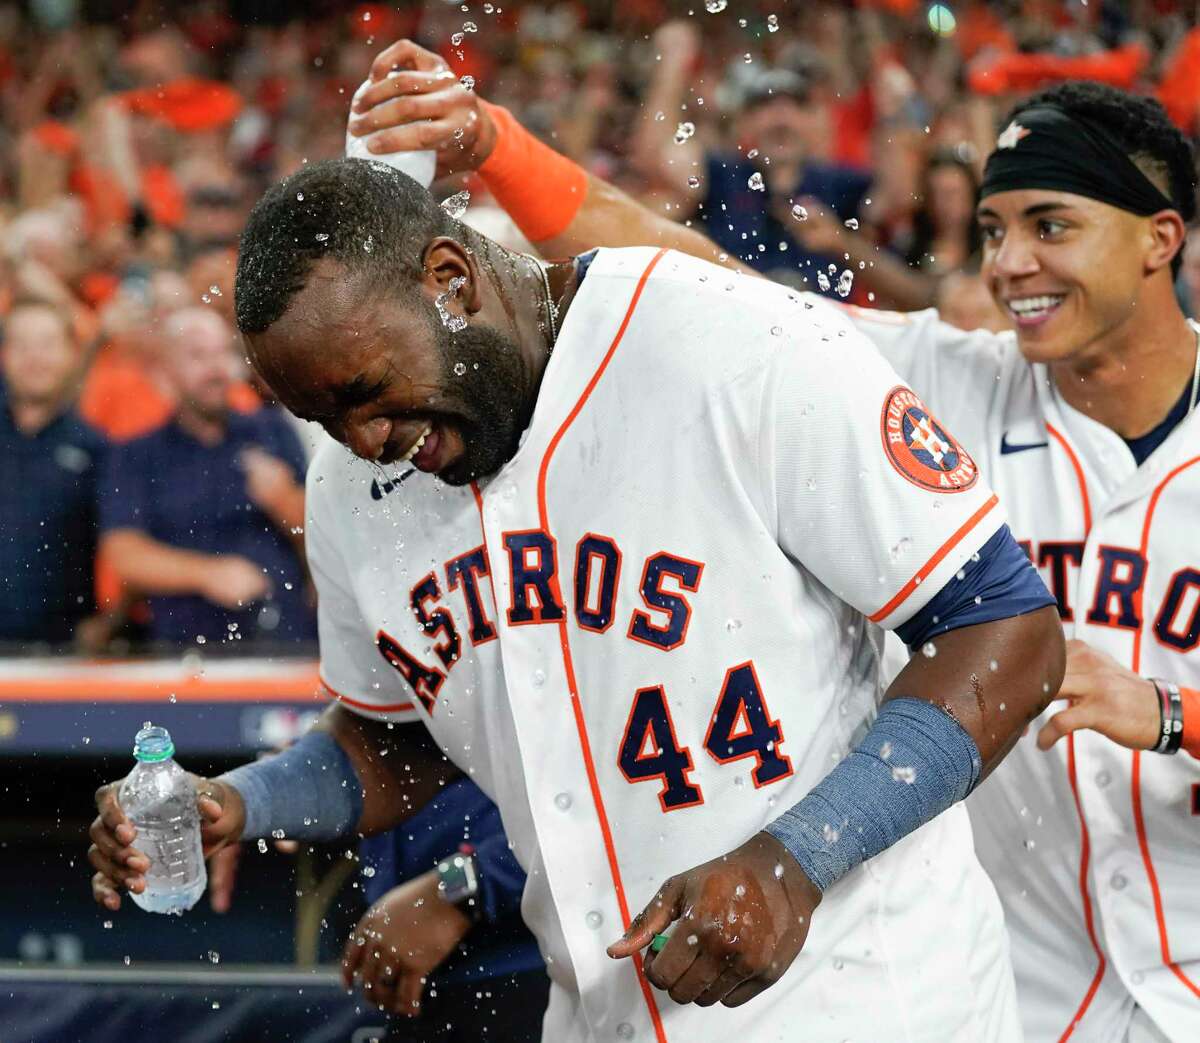 Houston Astros shortstop Jeremy Peña (3) dumps water on Yordan Alvarez (44) after his three-run, walk-off home run to beat the Seattle Mariners 8-7 in the ninth inning of Game 1 of the American League Division Series at Minute Maid Park on Tuesday, Oct. 11, 2022, in Houston.